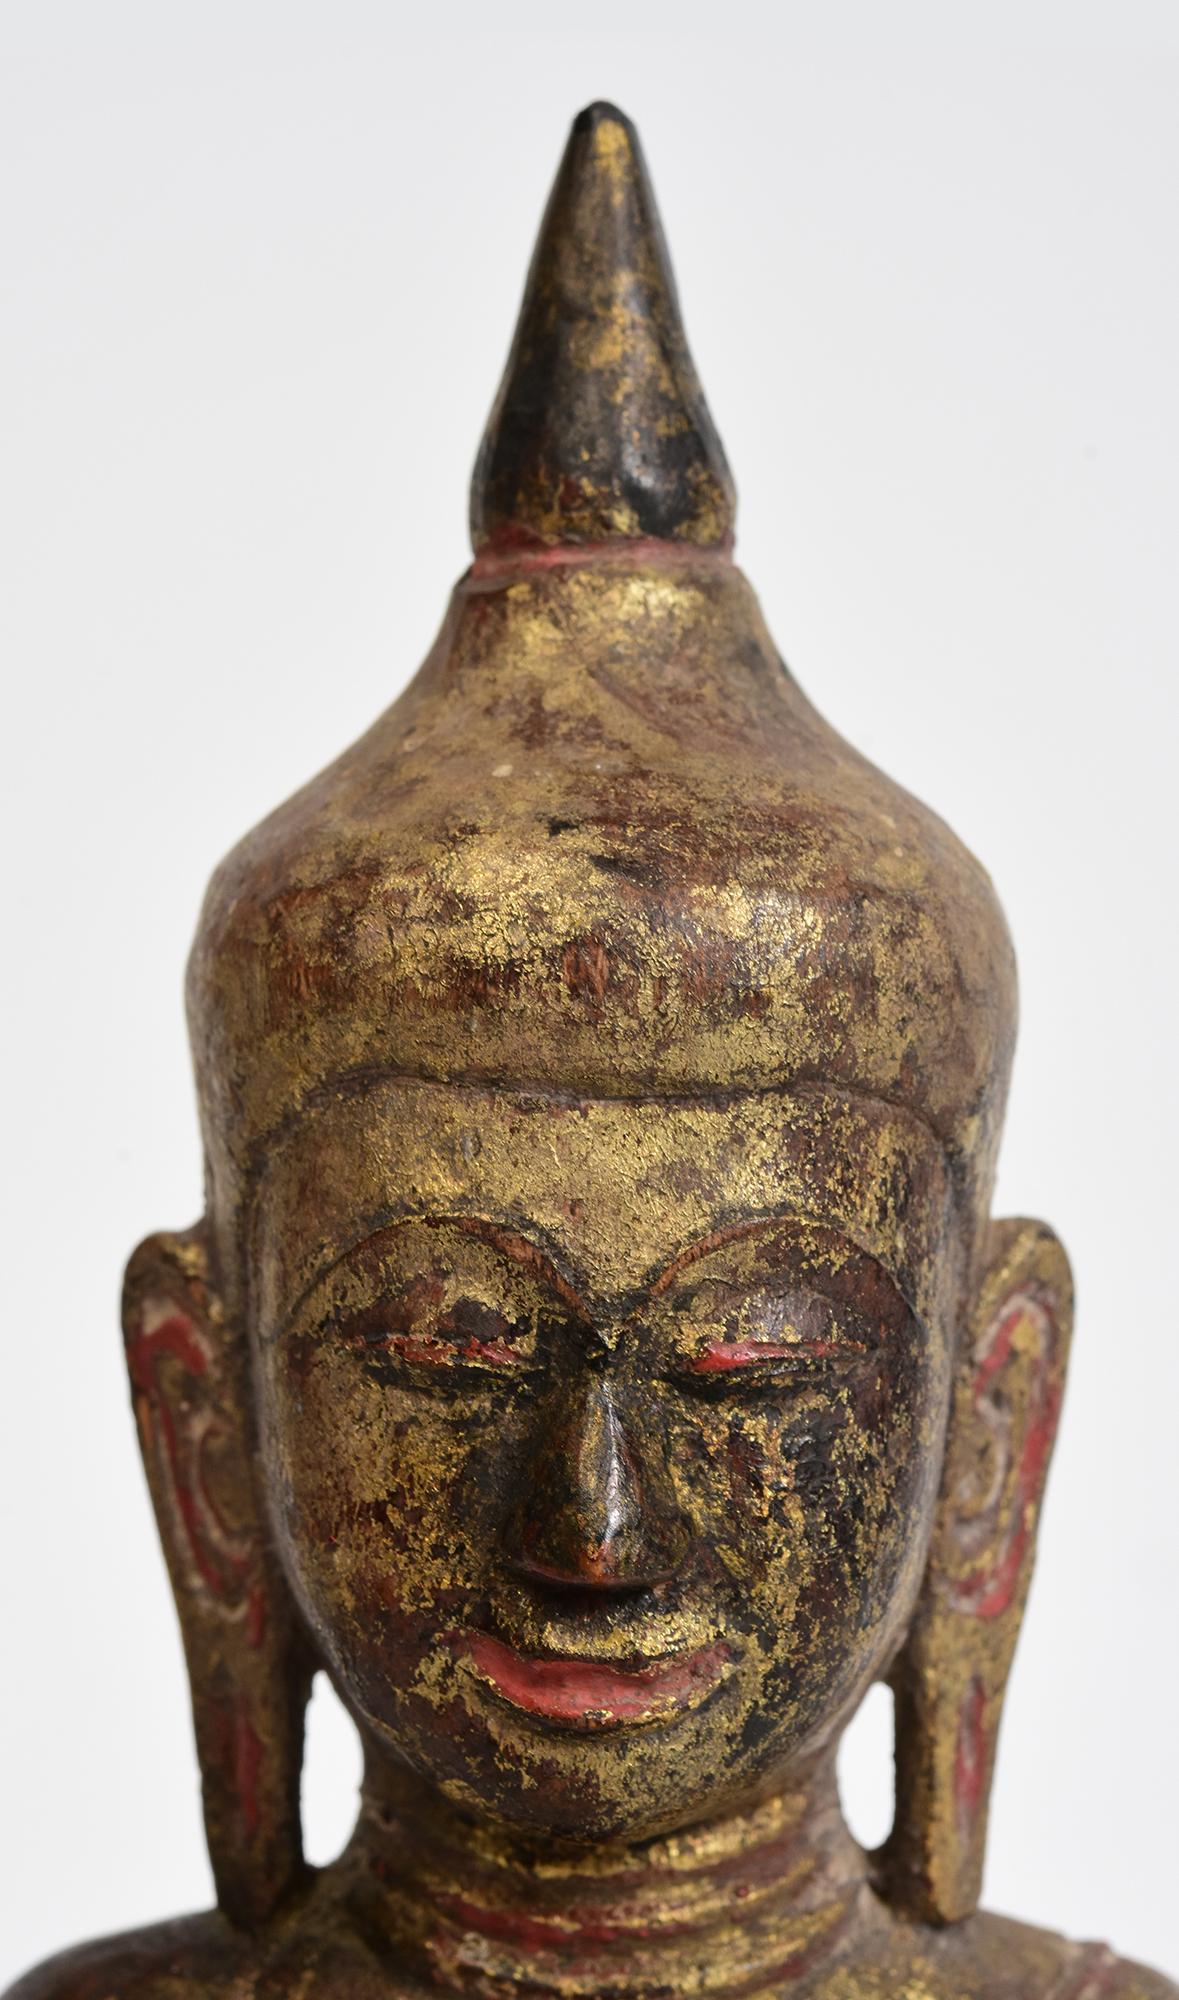 Antique Thai wooden Buddha sitting in Mara Vijaya (calling the earth to witness) posture on a base.

Age: Thailand, 19th Century
Size: Height 24.9 C.M. / Width 19.5 C.M.
Condition: Nice condition overall (some expected degradation due to its